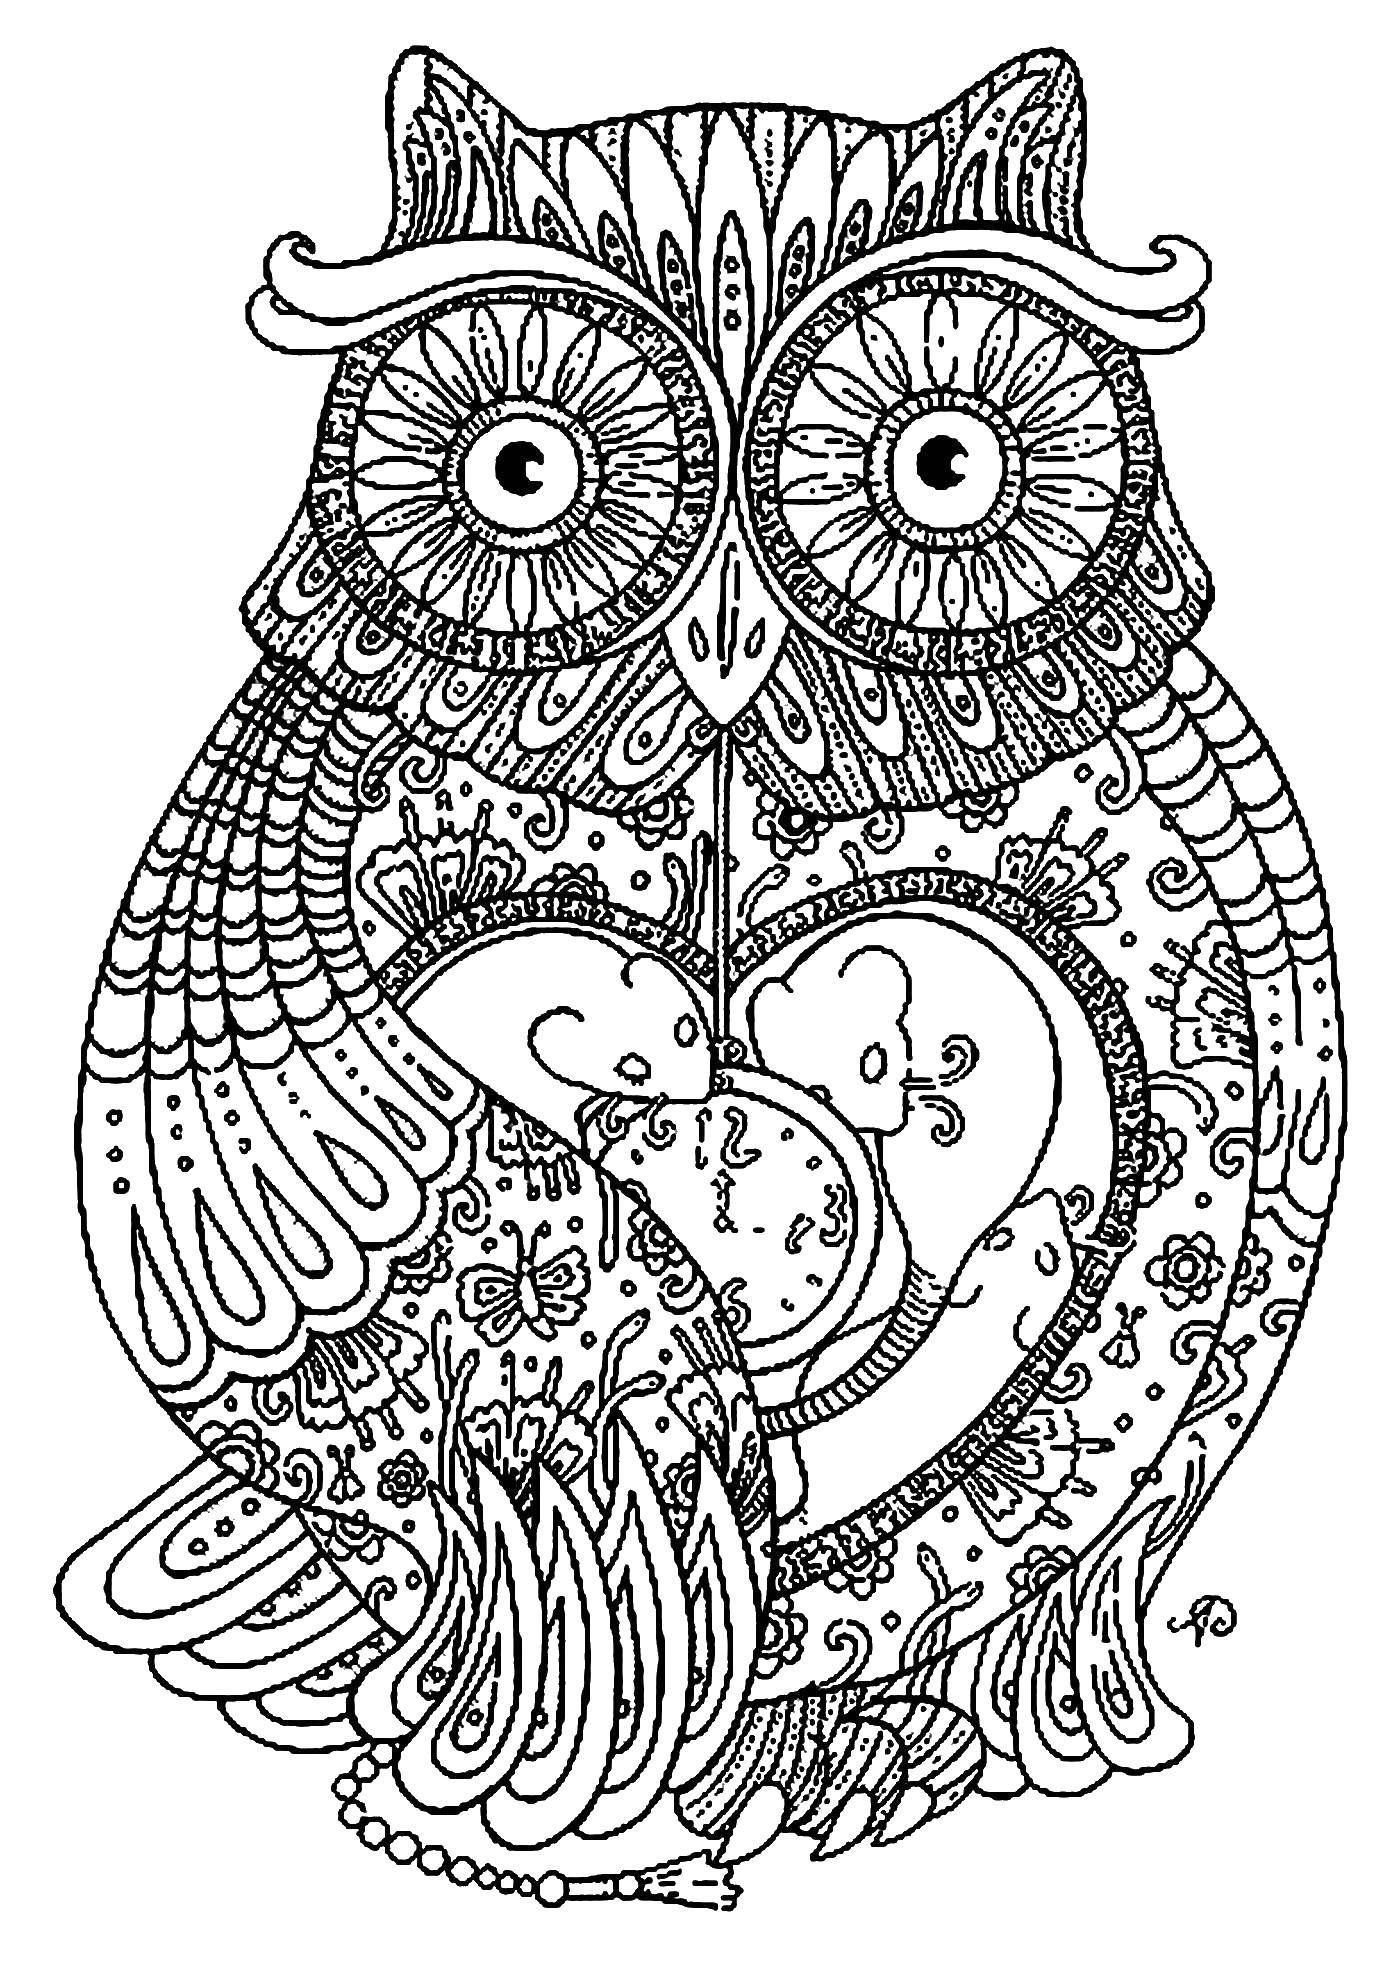 Coloring Coloring antistress. Category coloring antistress. Tags:  patterns, shapes, antistress, owl.